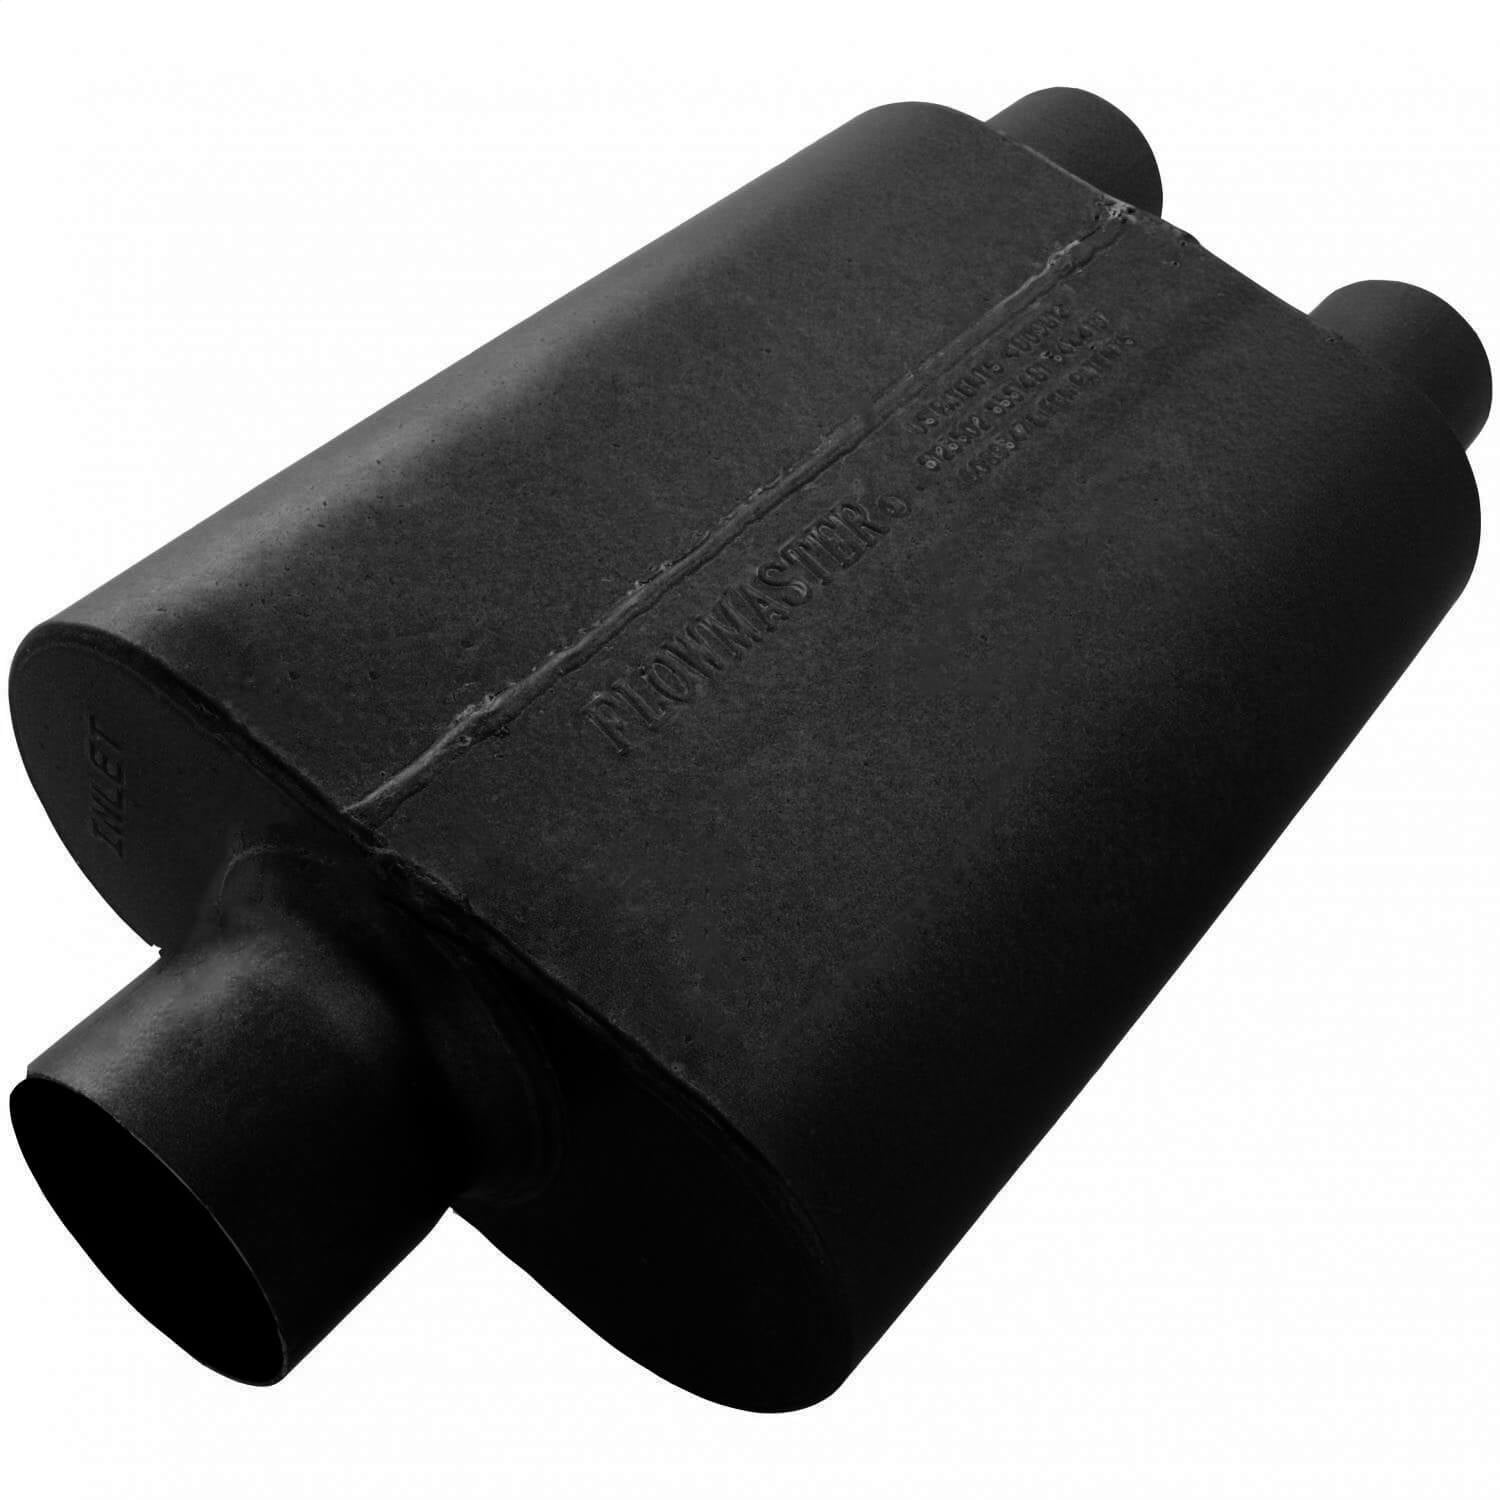 Center Out-Aggressive Flowmaster 815430 Outlaw Muffler 409S-3.00 3.00 in 